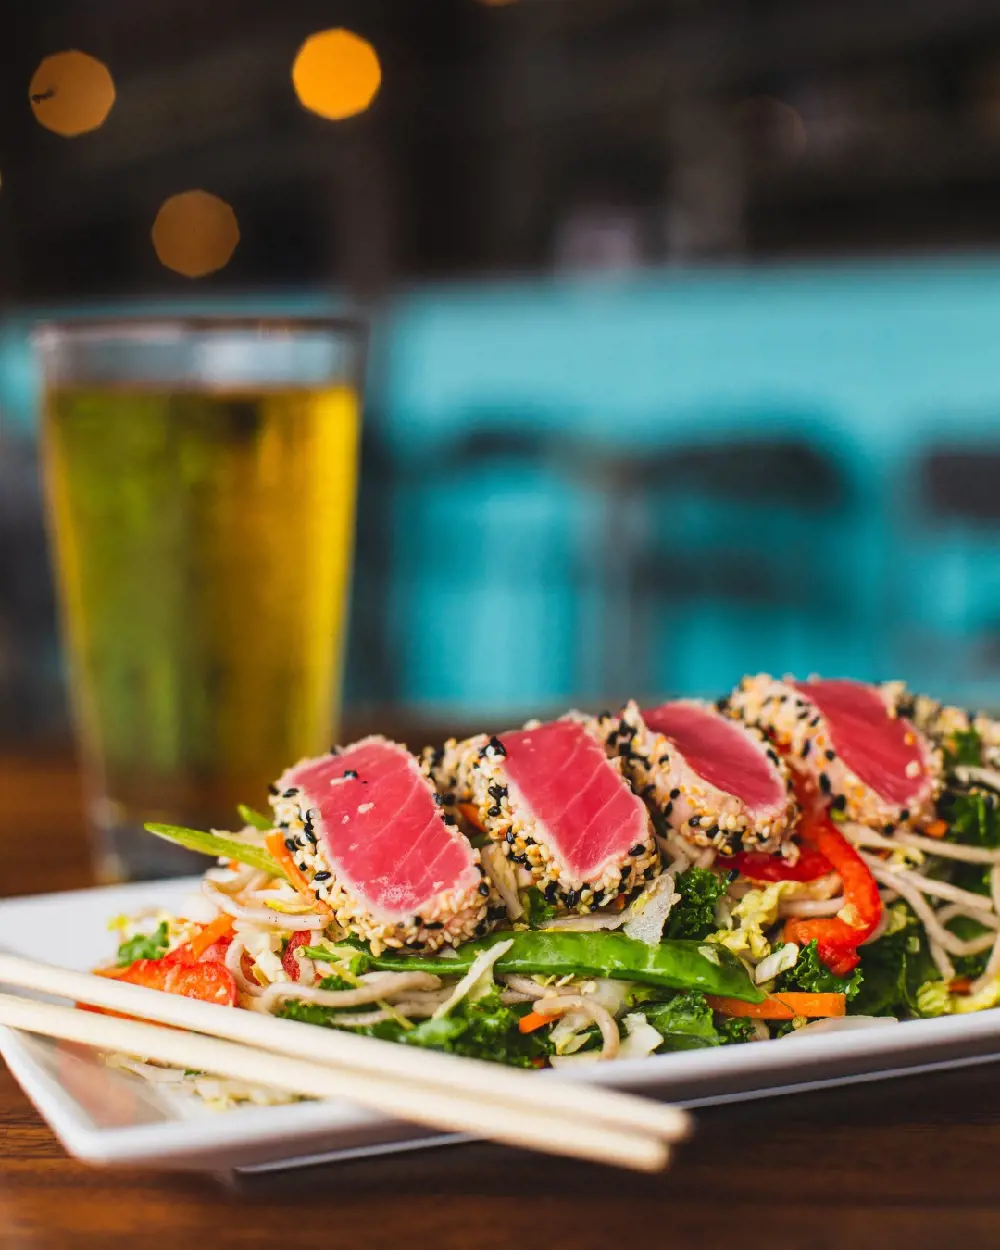 Thai Tuna Salad with sesame tuna, kale and cabbage is the must try dish